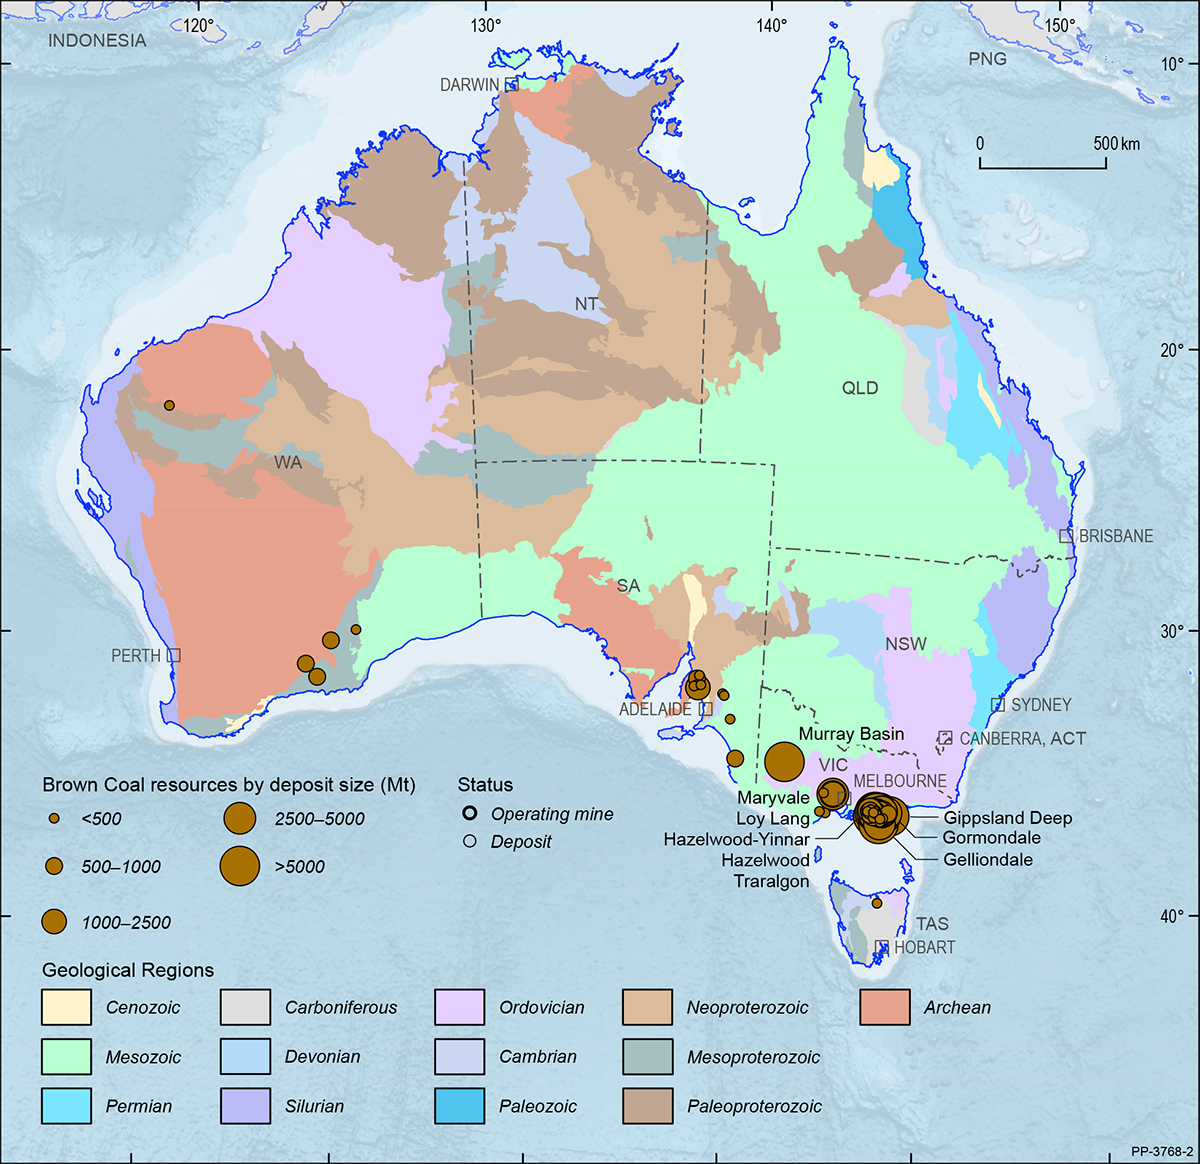 A map showing the Australian continent shaded by the ages of the main geological provinces highlighting the geographical distribution of Australian brown coal deposits and operating mines 2019.